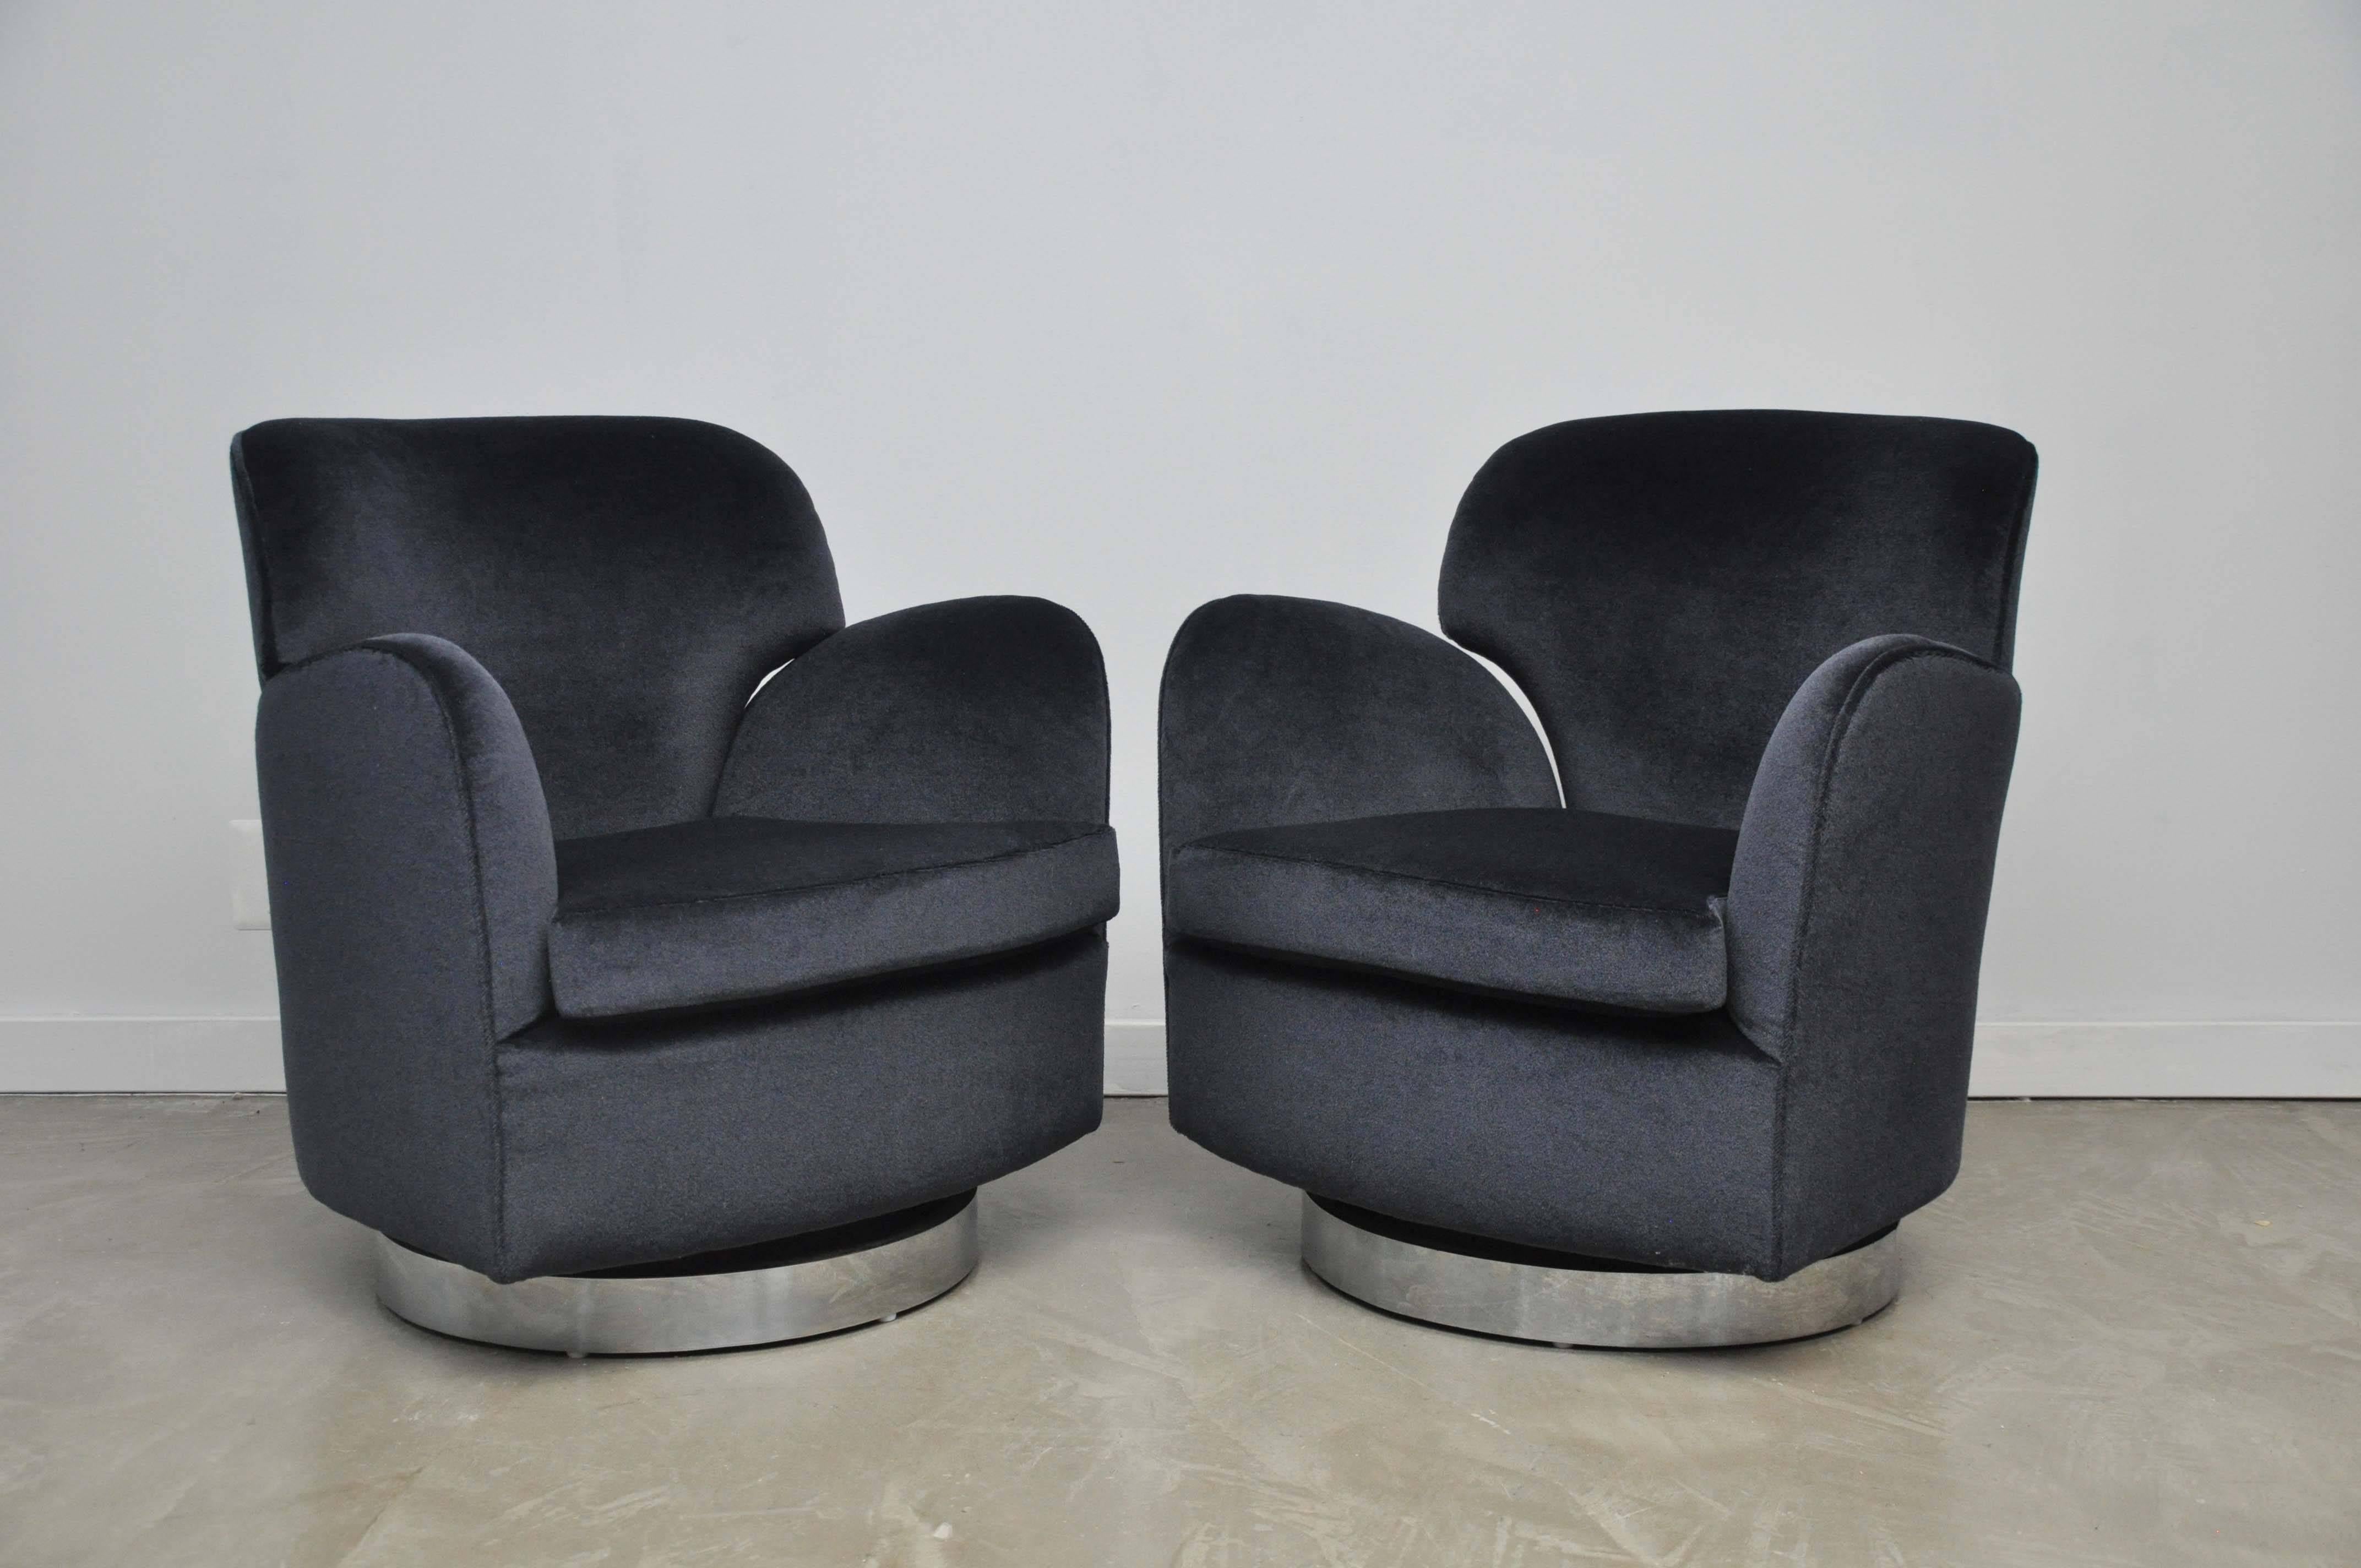 Milo Baughman swivel chairs with recline backs. Newly upholstered in charcoal mohair over chrome bases.